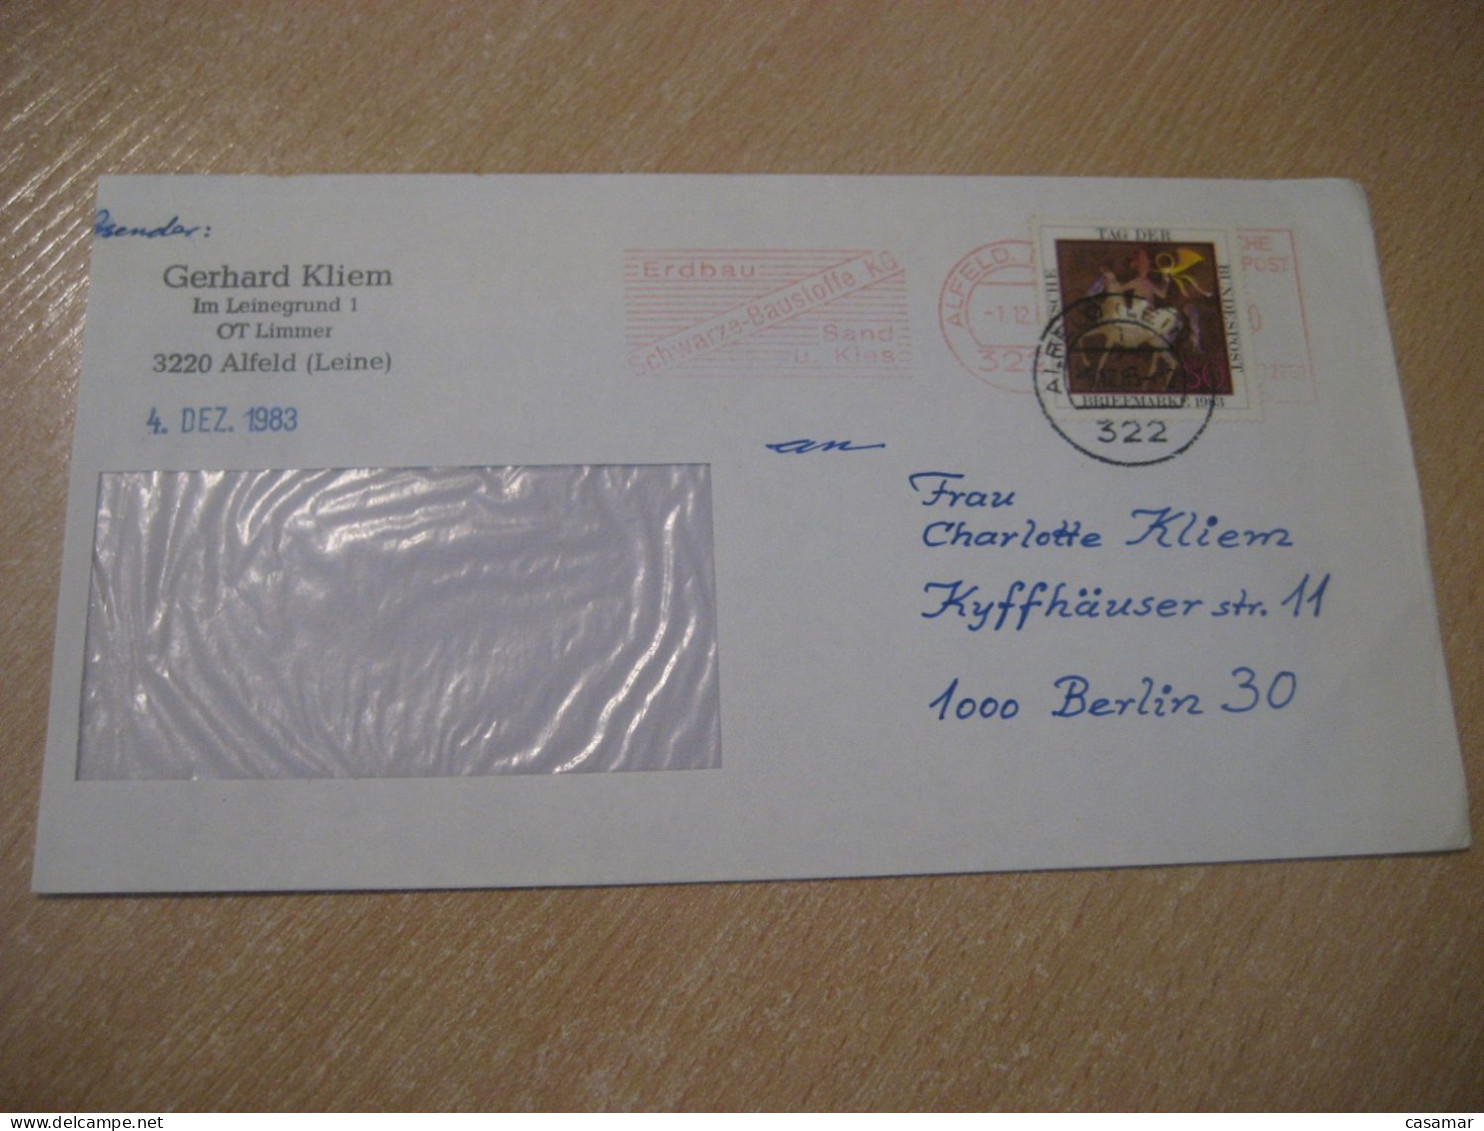 ALFELF 1983 To Berlin Meter Mail Cancel Cover GERMANY - Covers & Documents